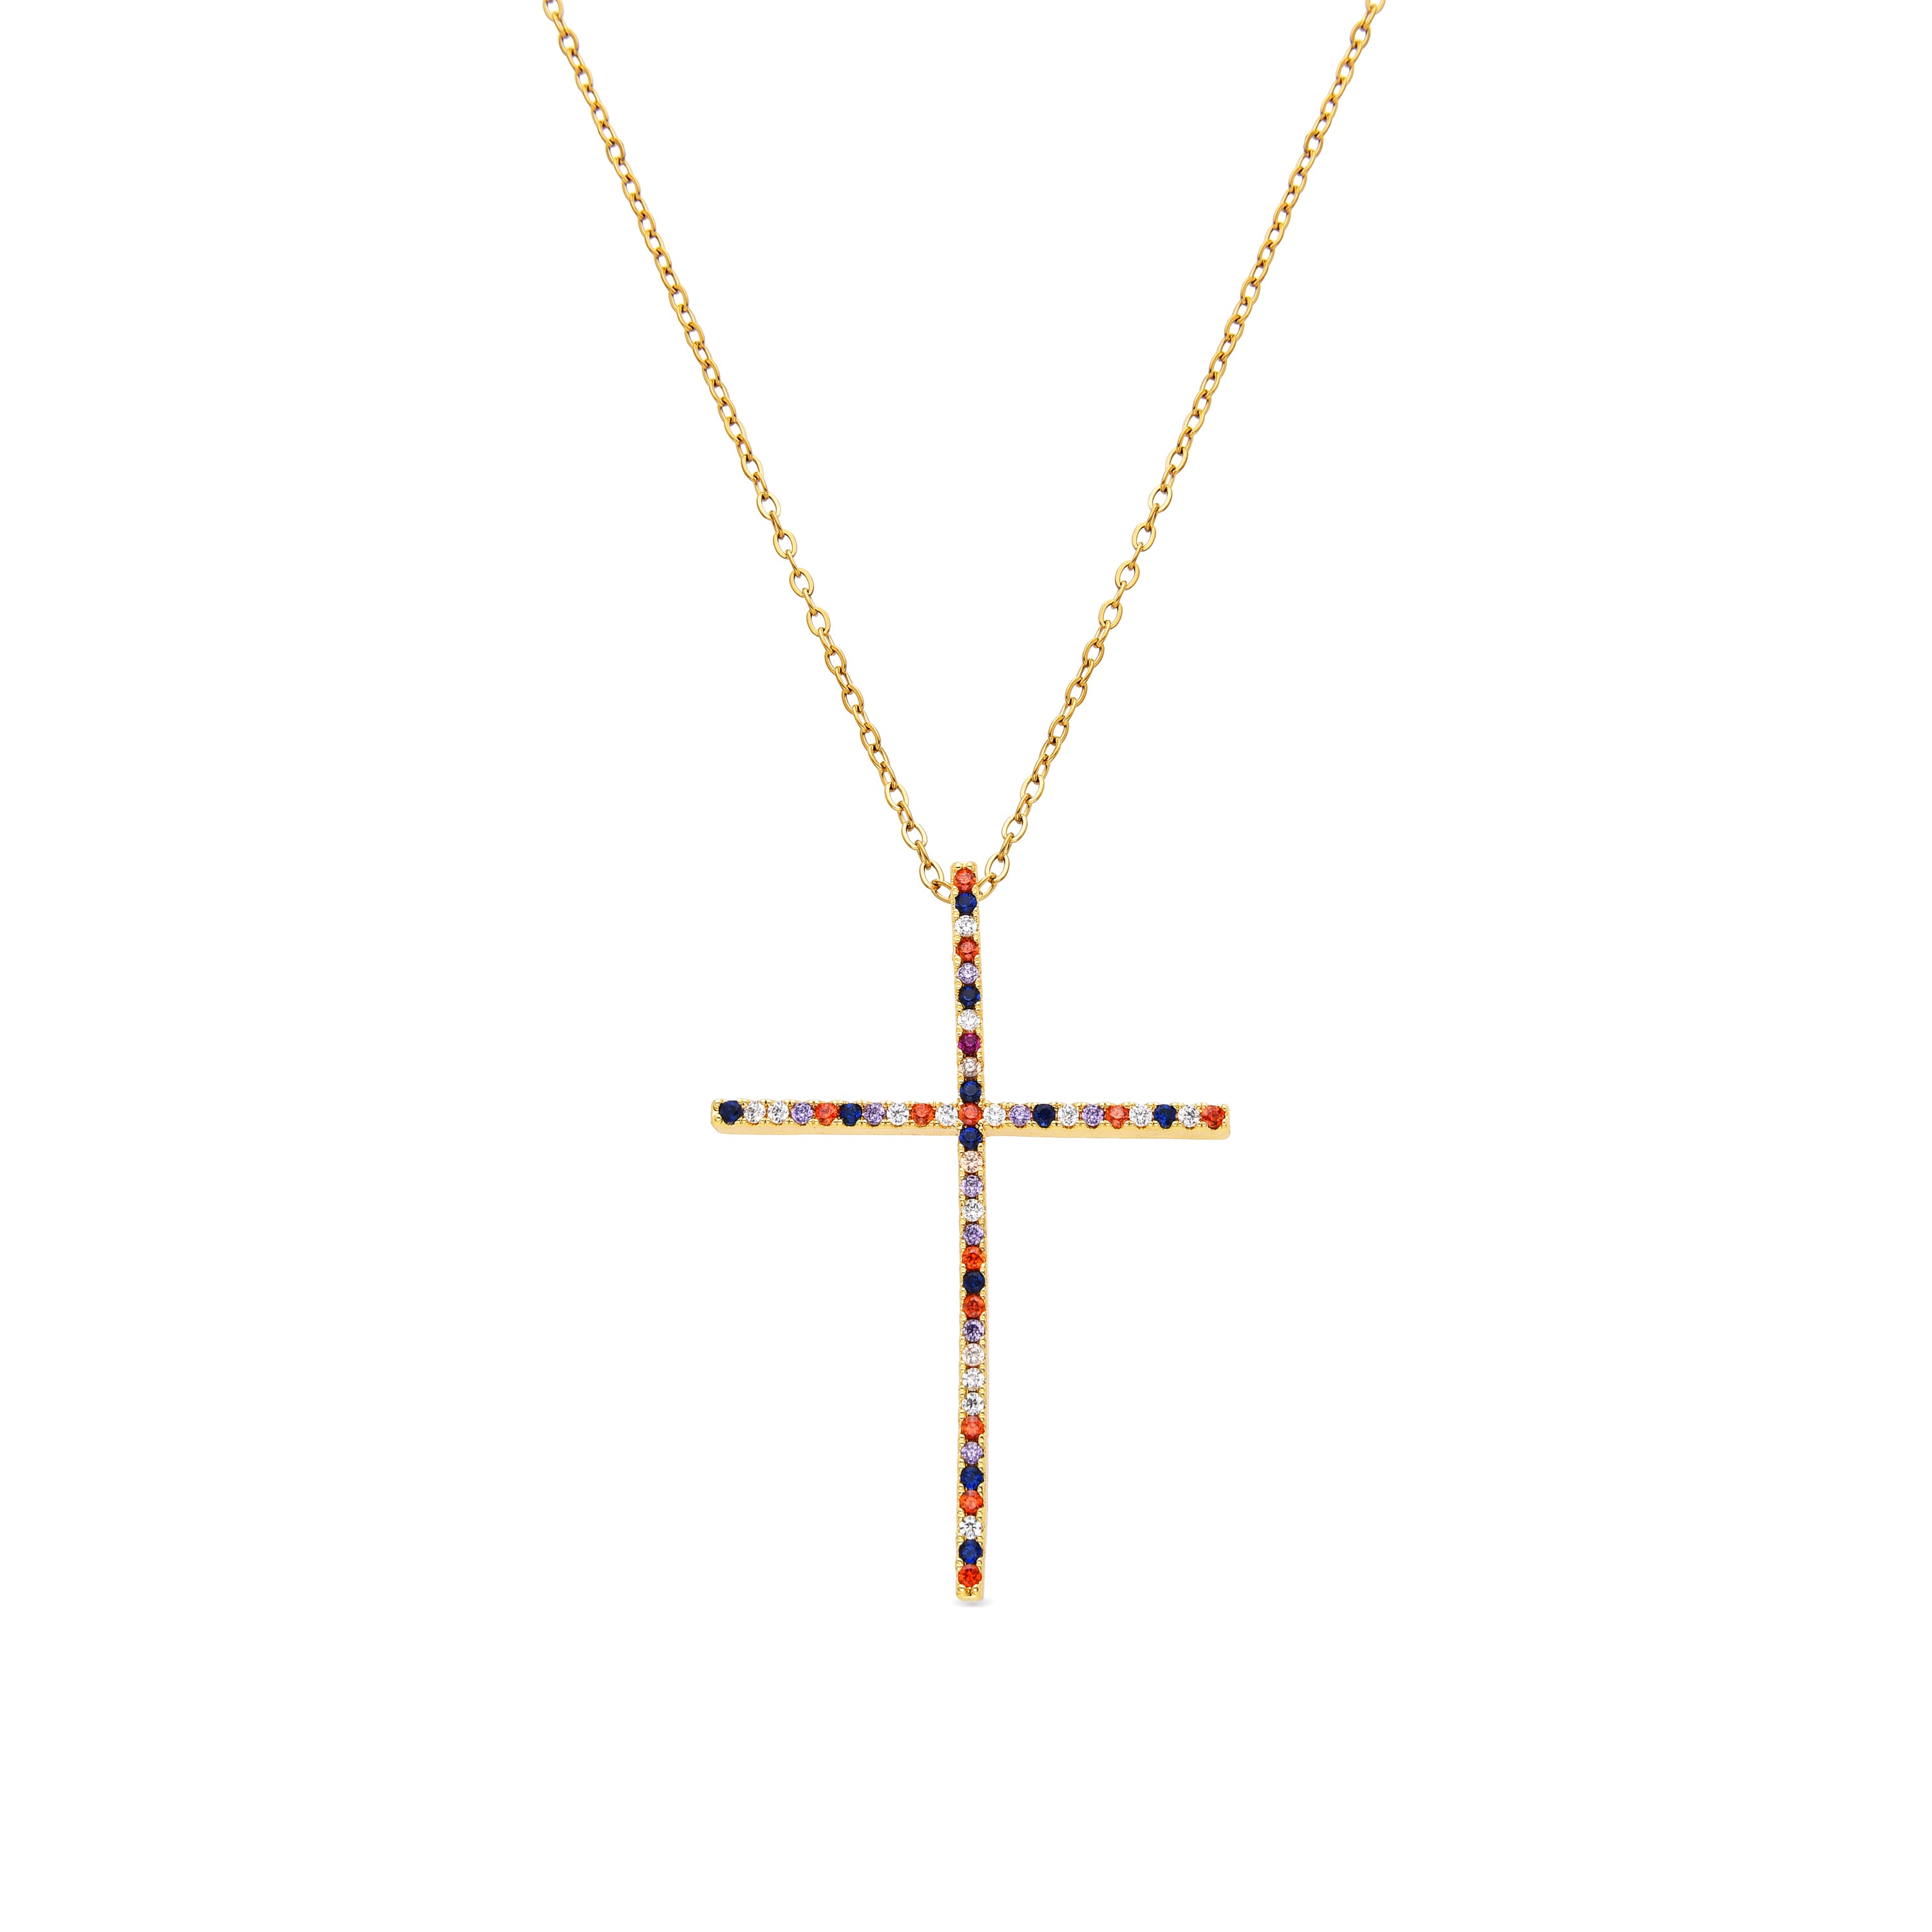 Irend necklace 18k yellow gold finish